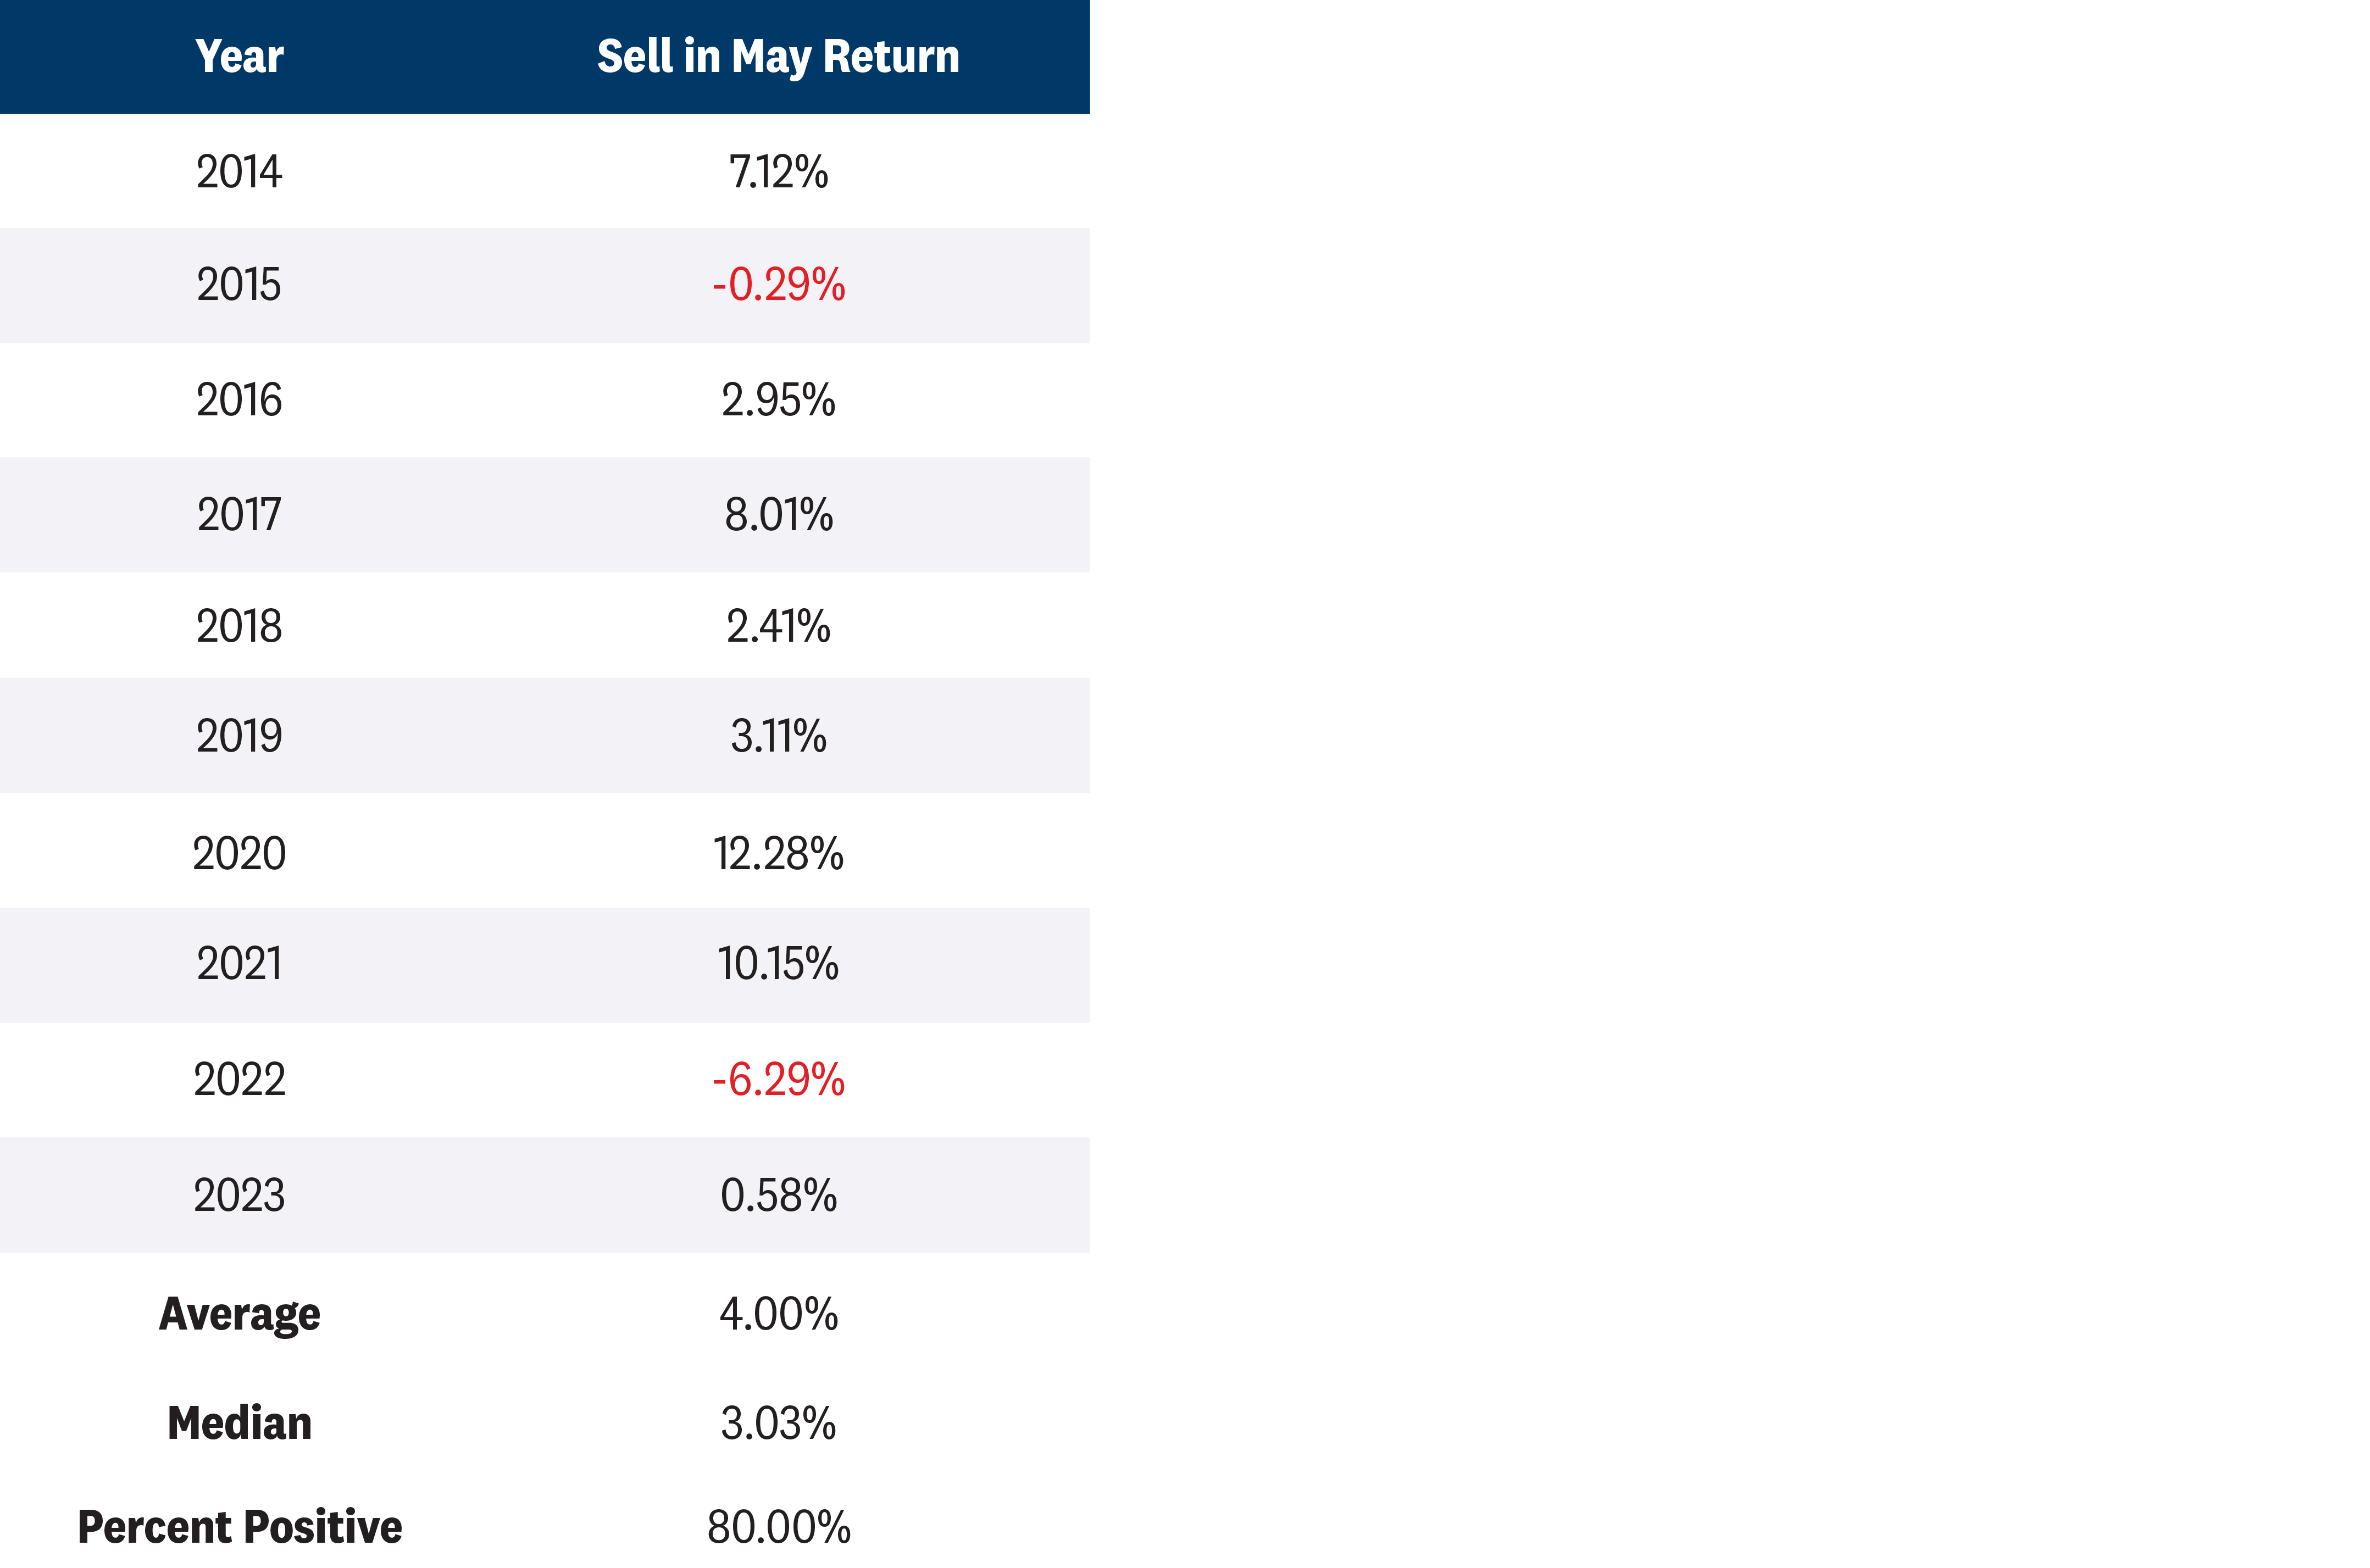 Table of May through November average returns from 2014 to 2023 highlighting that over the last 10 years, monthly returns in May have averaged 0.7%, with nine of the last 10 years producing positive monthly returns. This compares to the longer-term average May return of only 0.2%. 